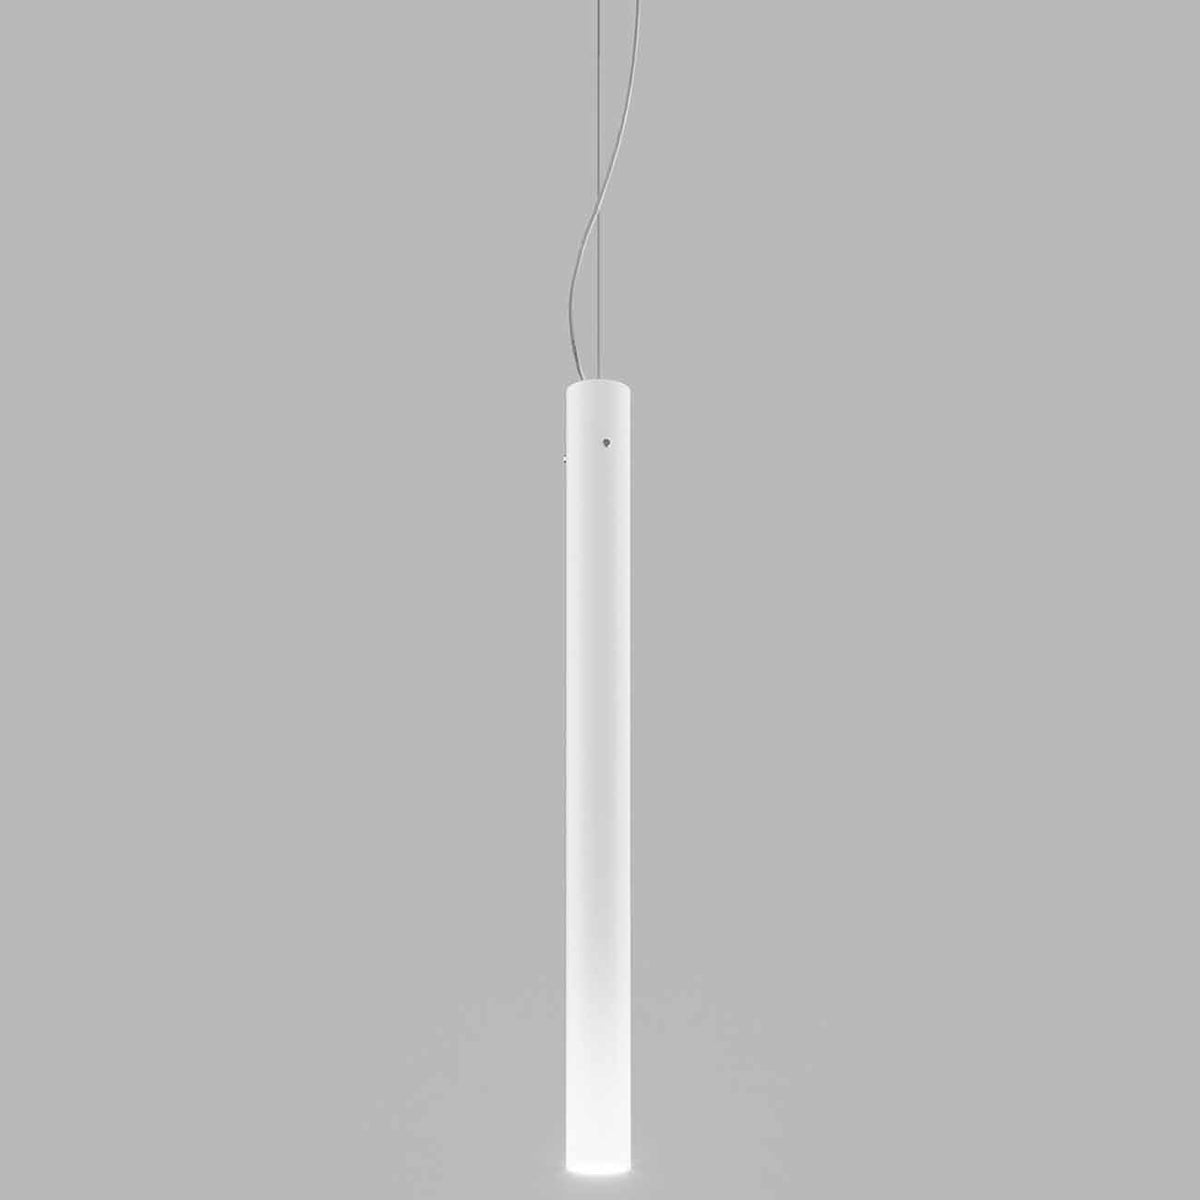 Candela Suspension White Glossy Freame with Glossy Chrome Finish